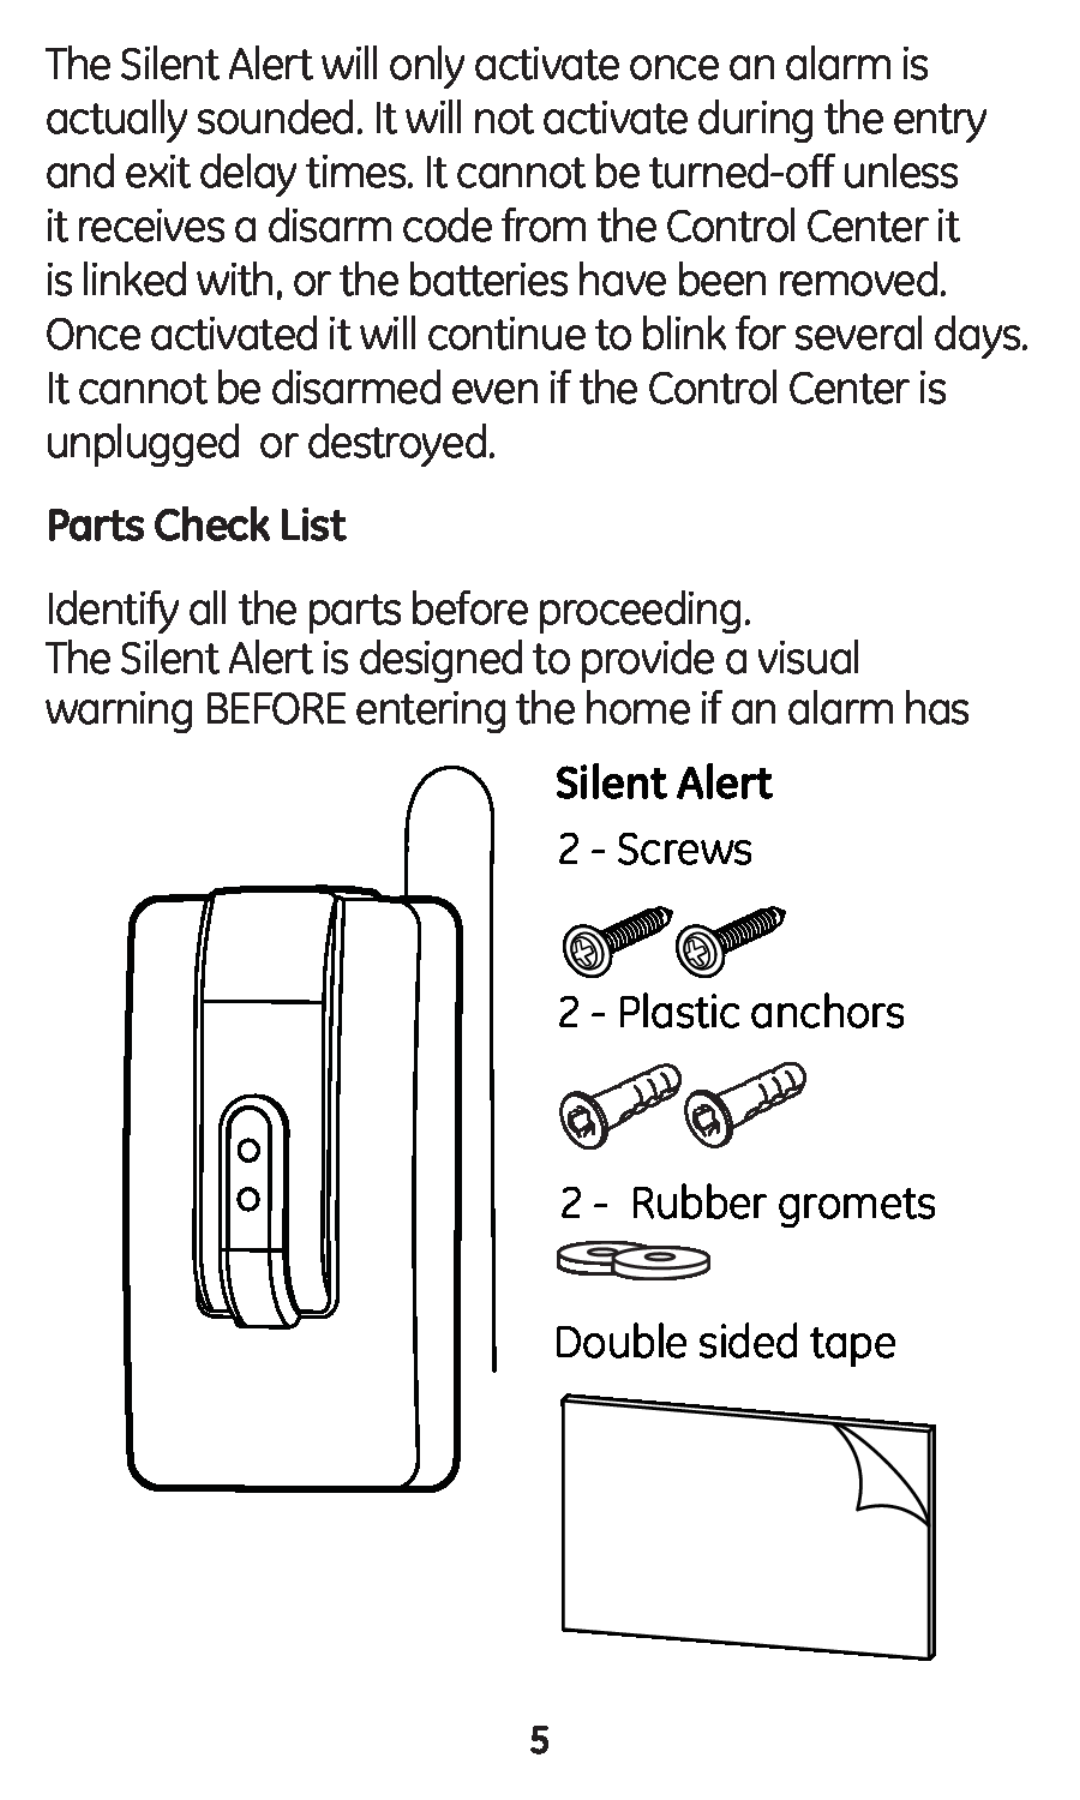 GE 45137 user manual Parts Check List, Identify all the parts before proceeding, Silent Alert, Screws 2 - Plastic anchors 